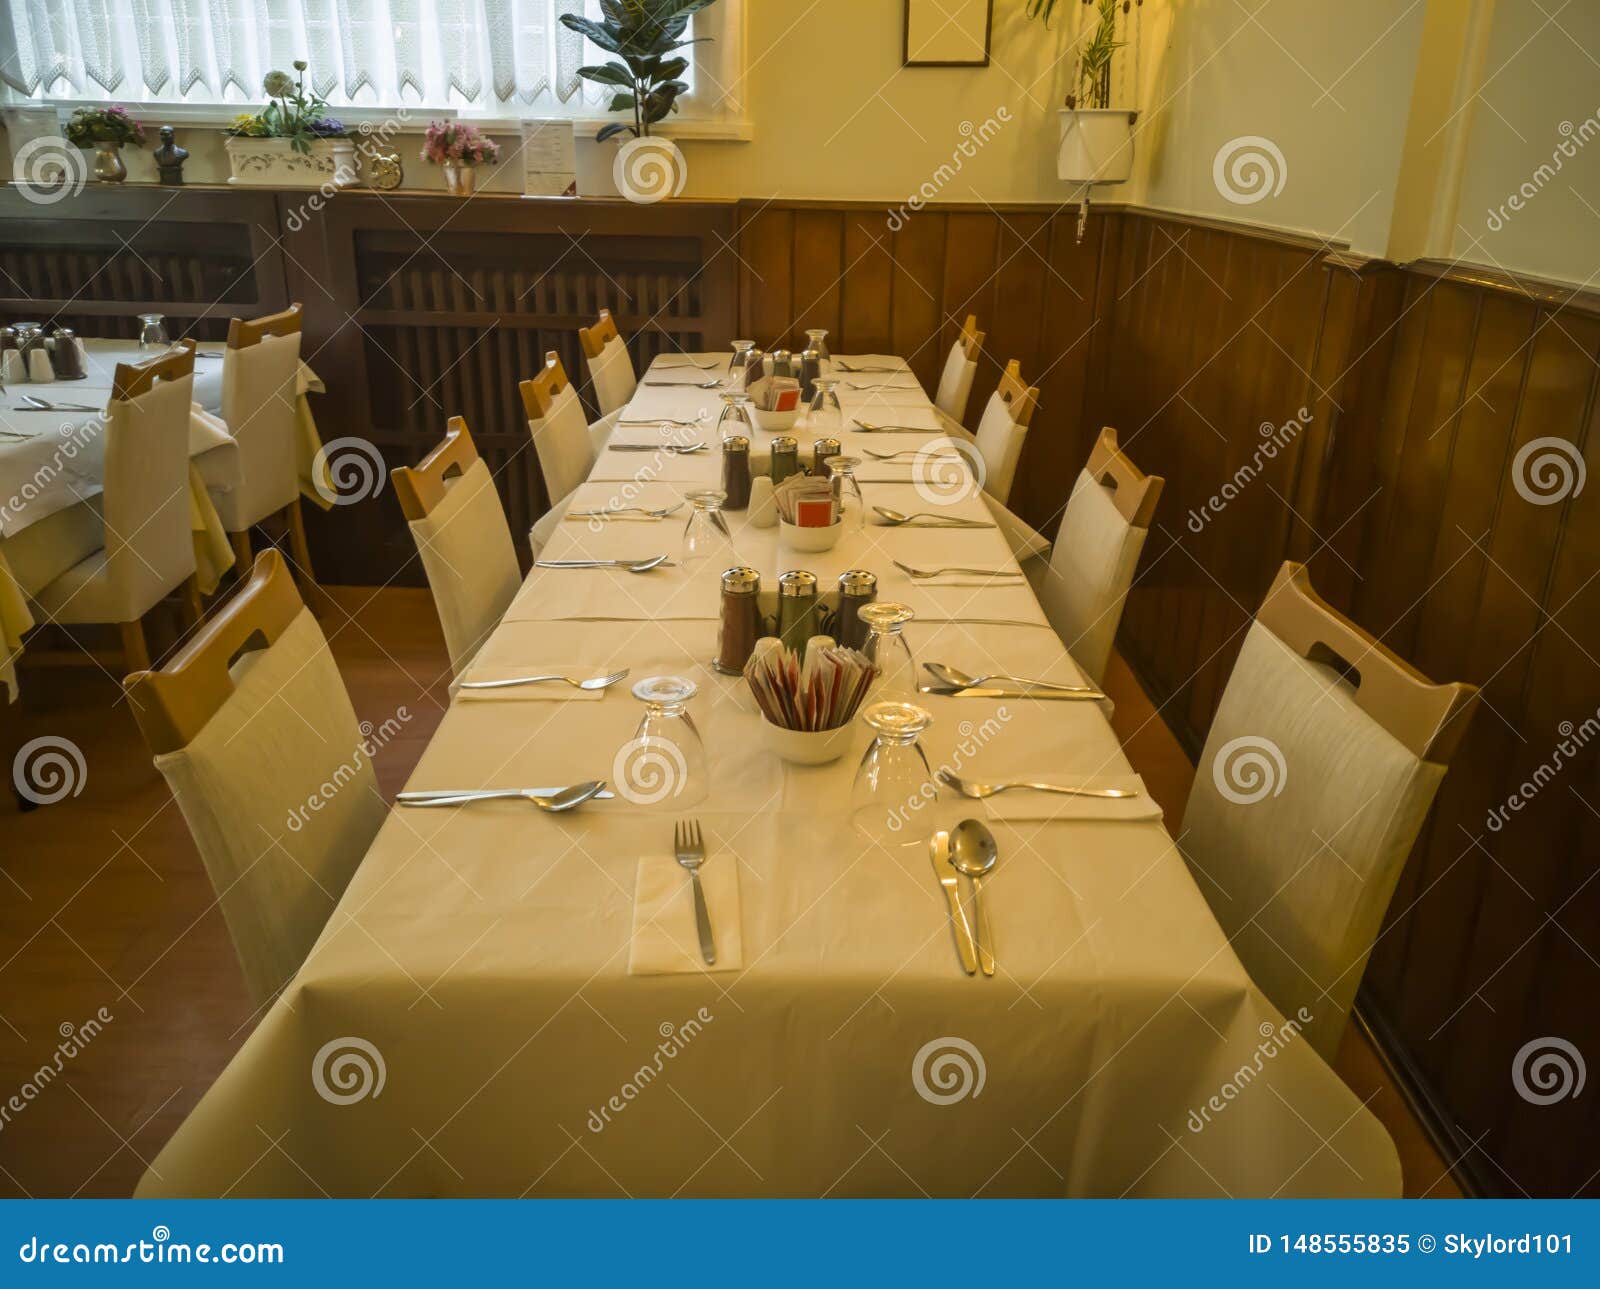 A Restaurant Interior With Fancy Old Tables And Chairs